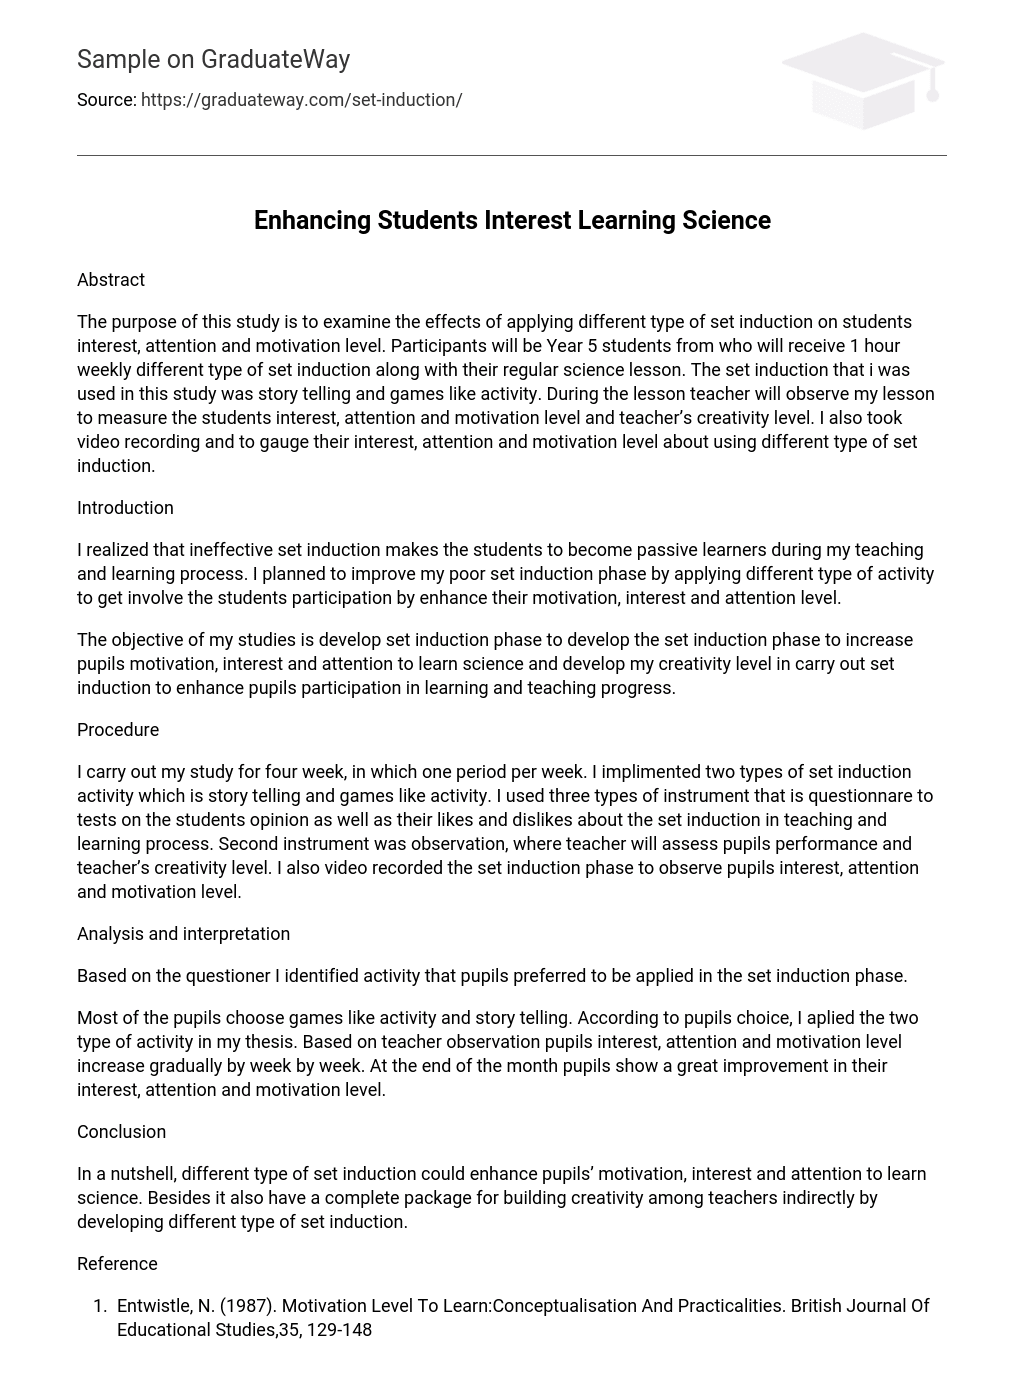 Enhancing Students Interest Learning Science